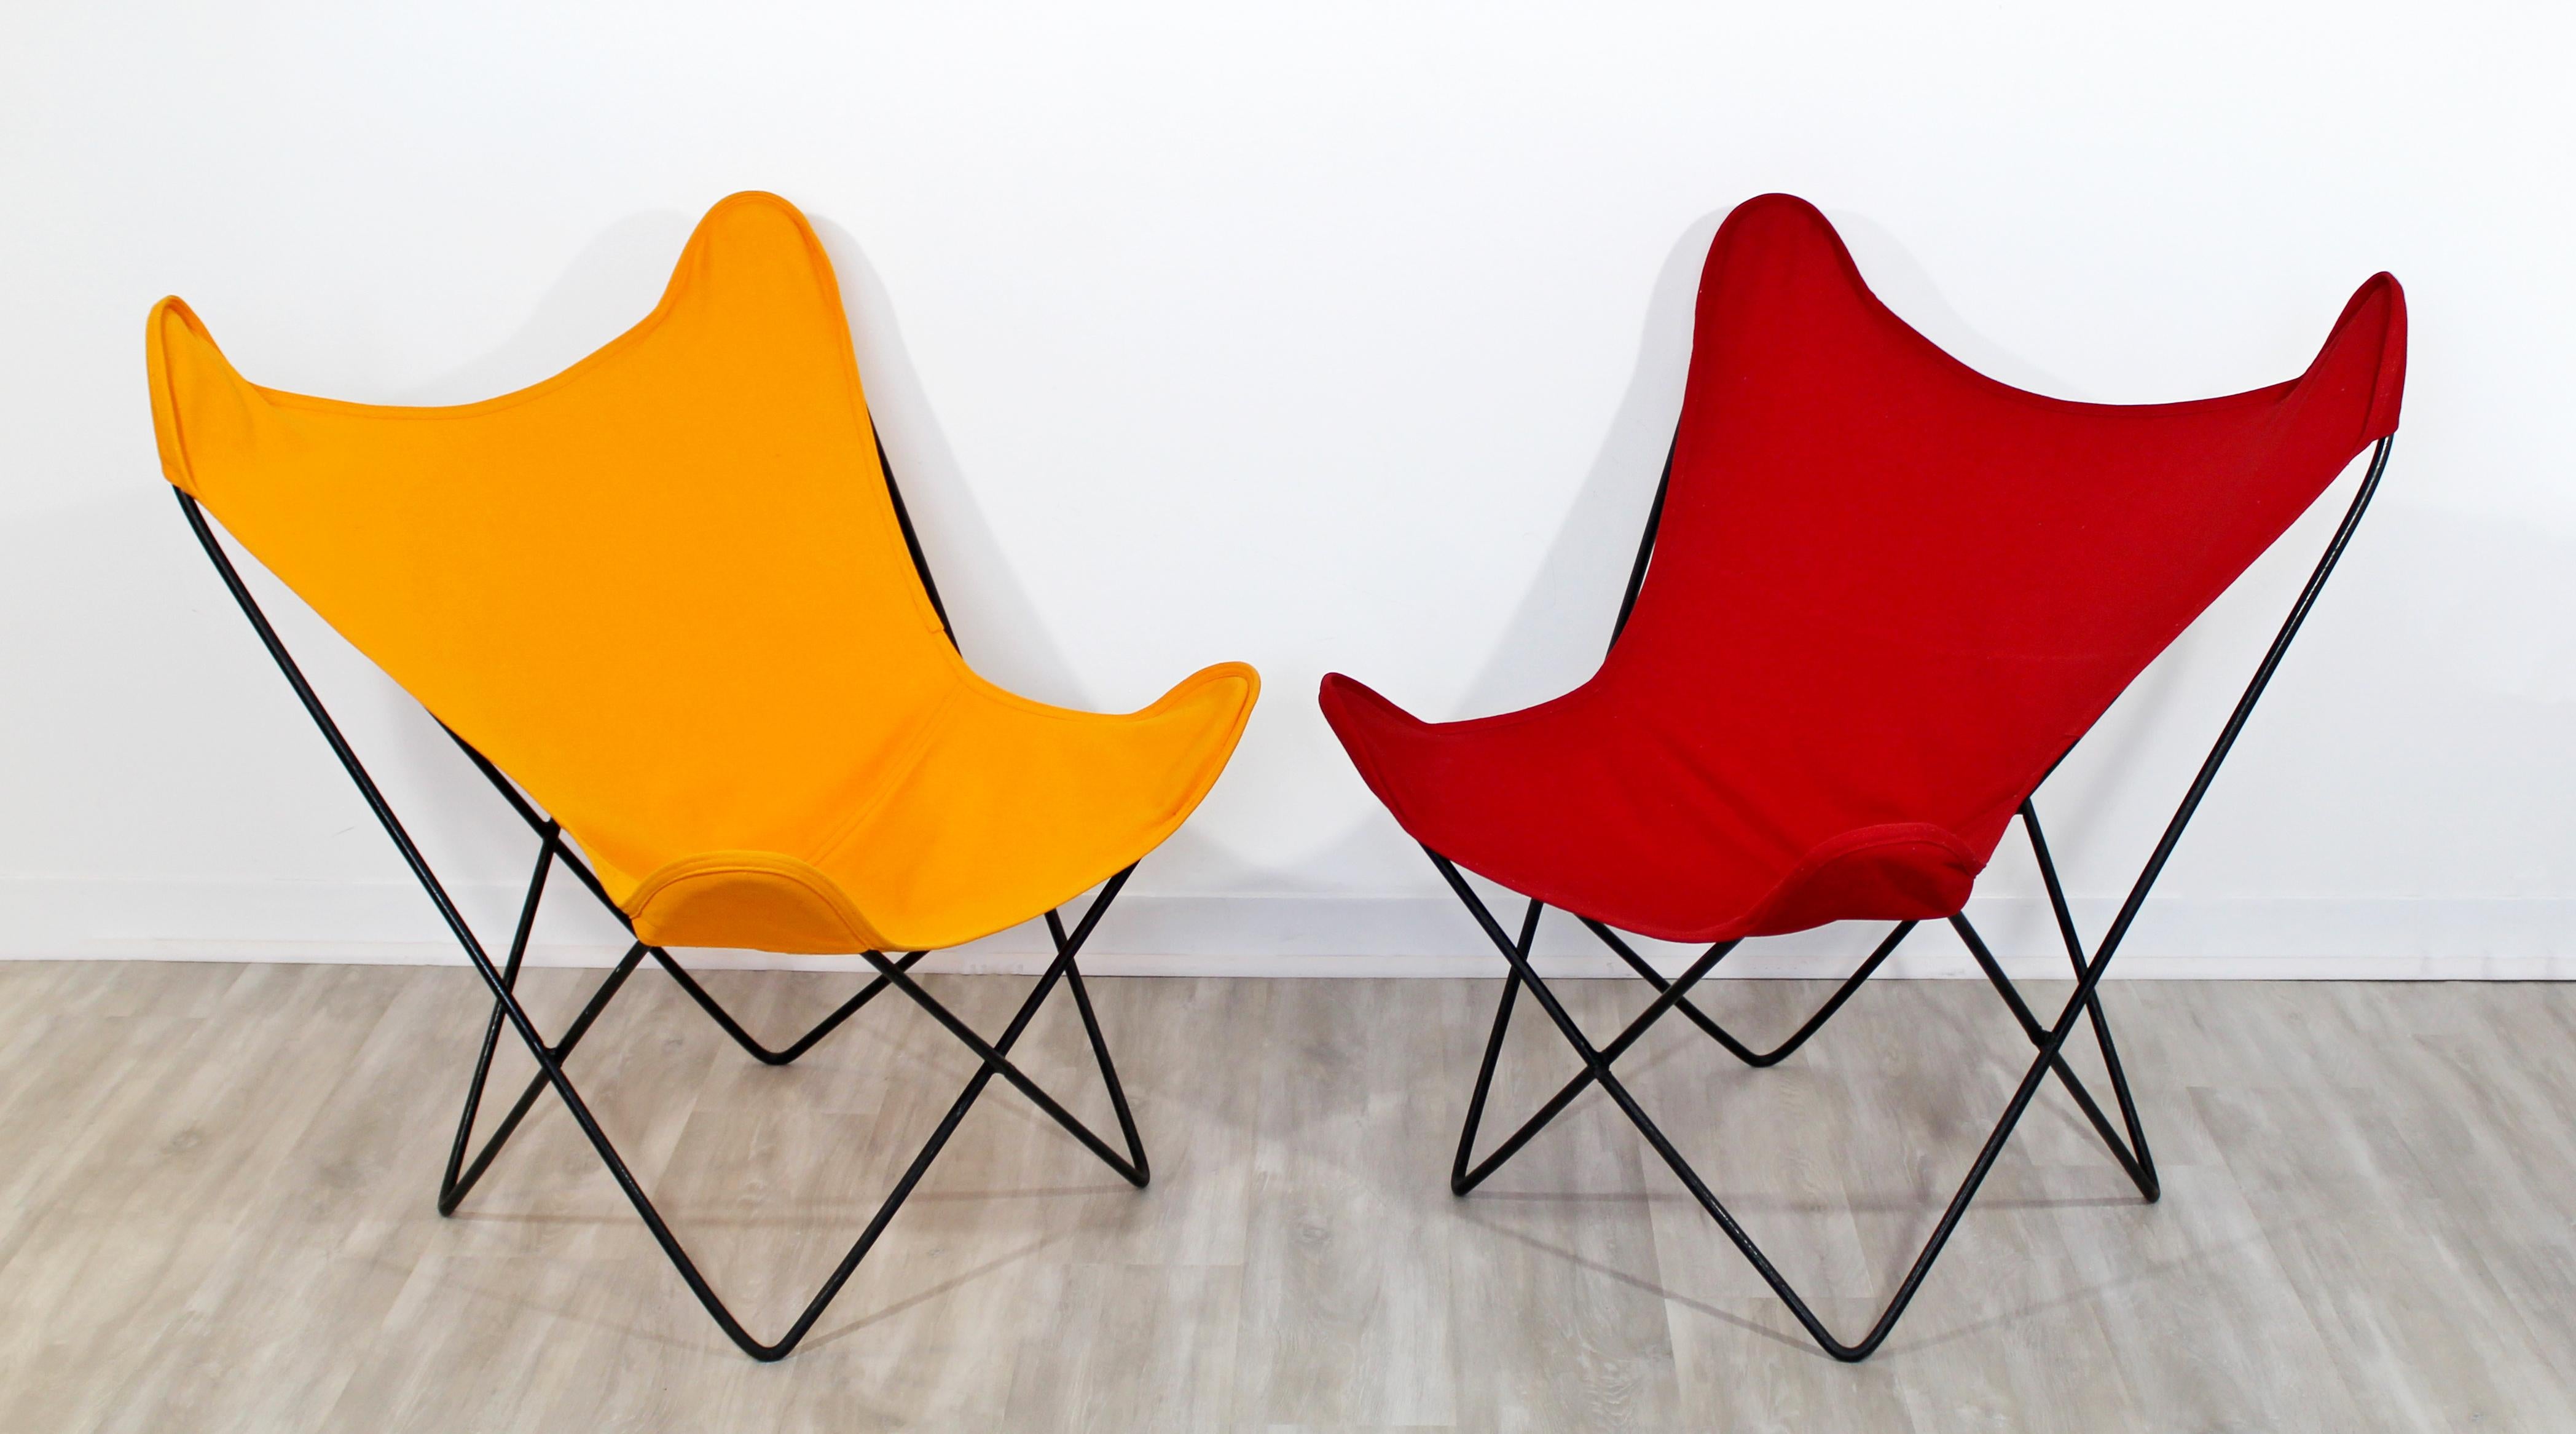 For your consideration is a pair of iron butterfly lounge chairs, in red and orange, by Knoll, circa the 1970s. In excellent vintage condition. The dimensions are 31